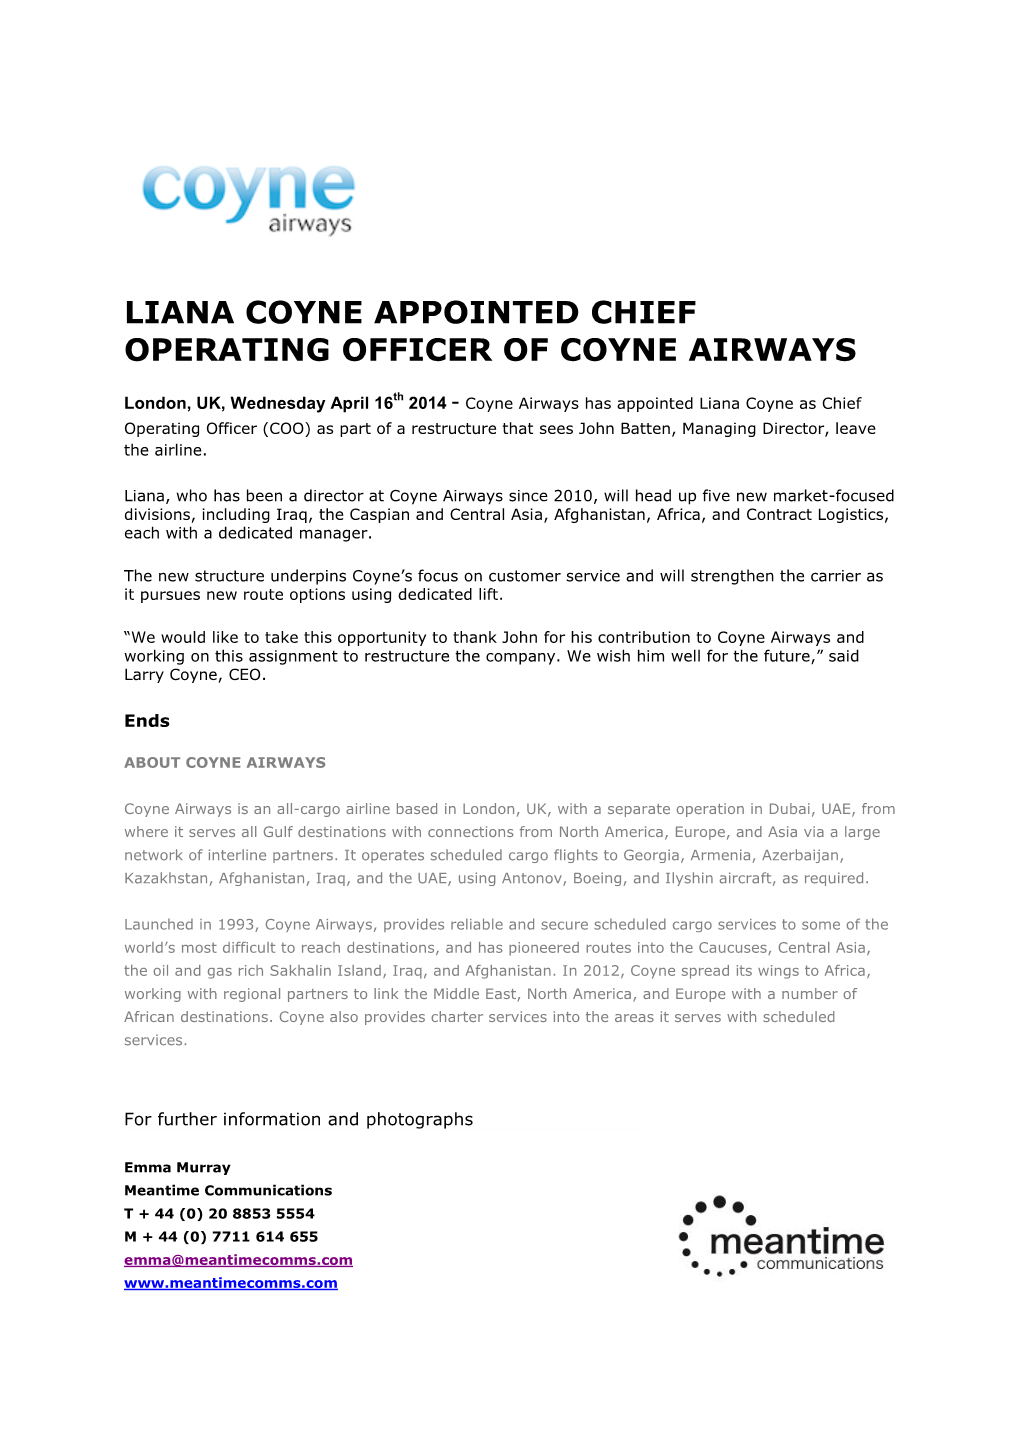 Liana Coyne Appointed Chief Operating Officer of Coyne Airways